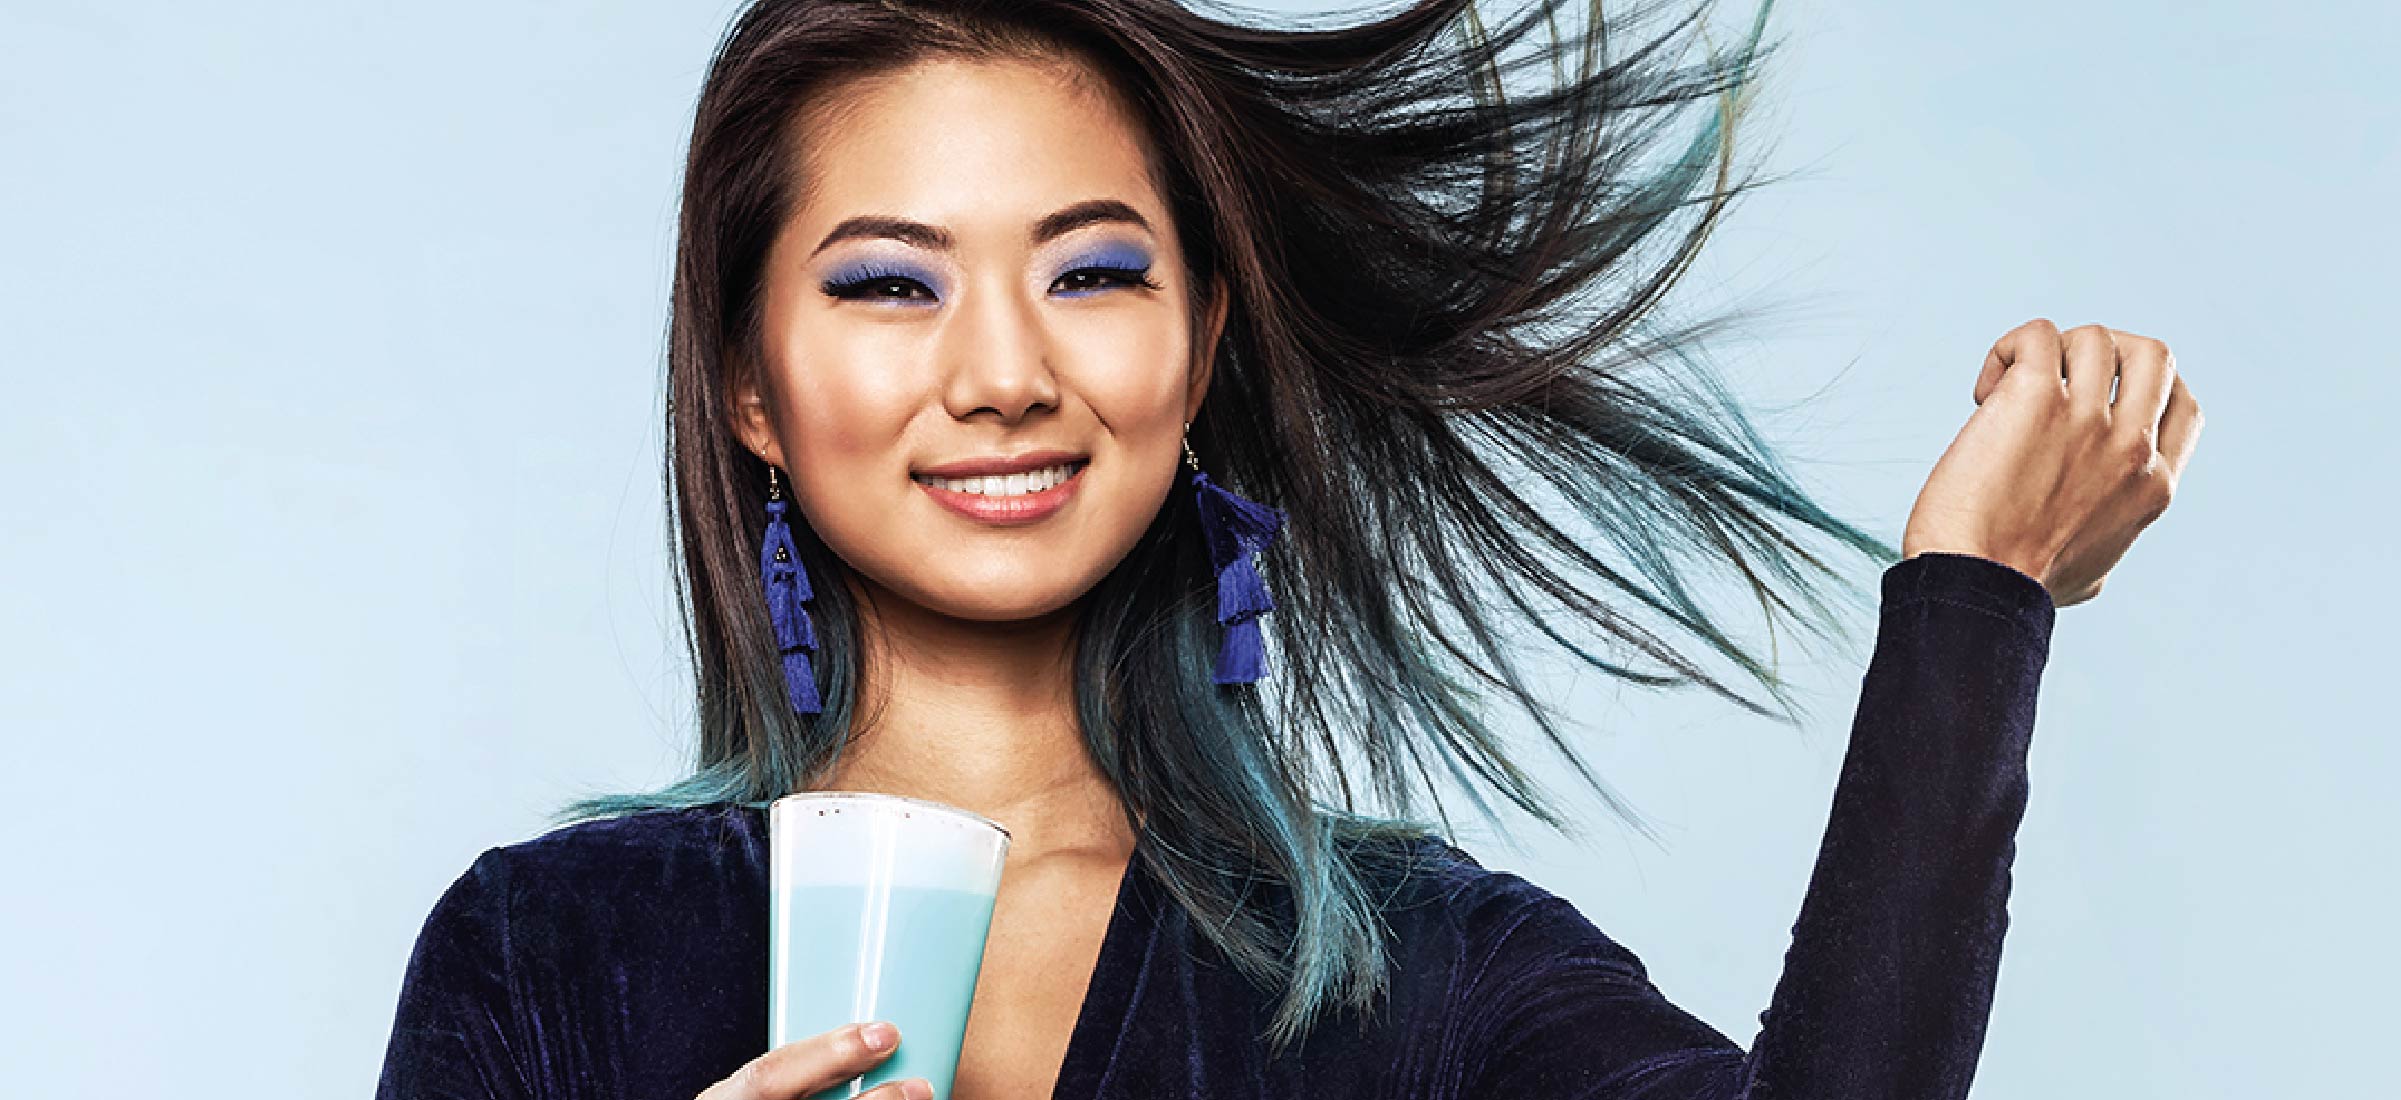 This season’s hottest new accessory: The Blue Latte